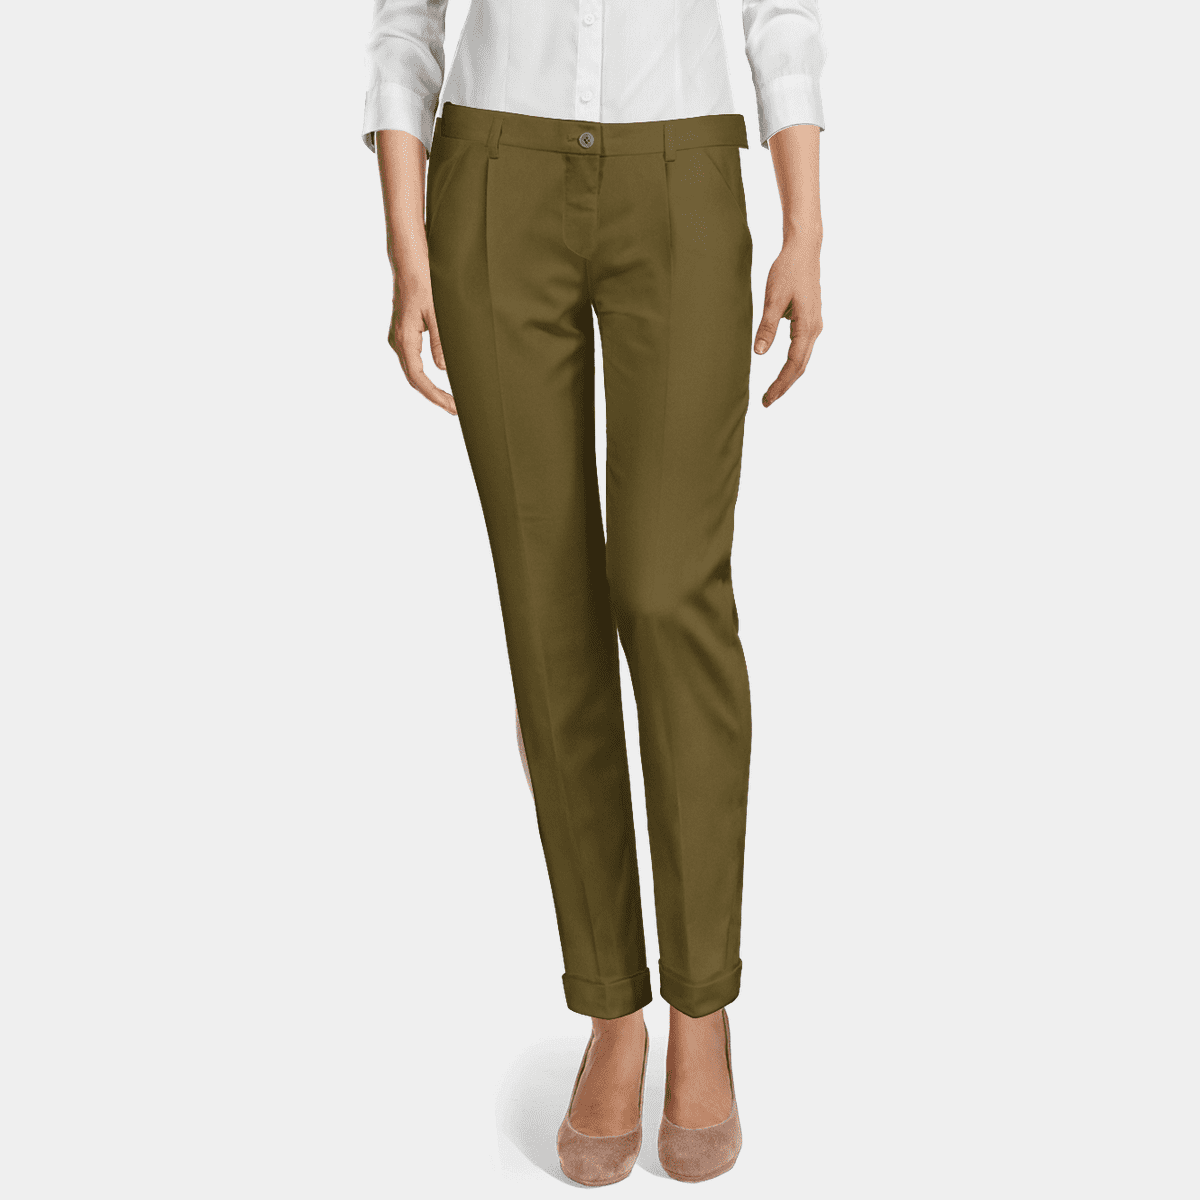 Women's Cigarette Pants  Made to Measure - Sumissura